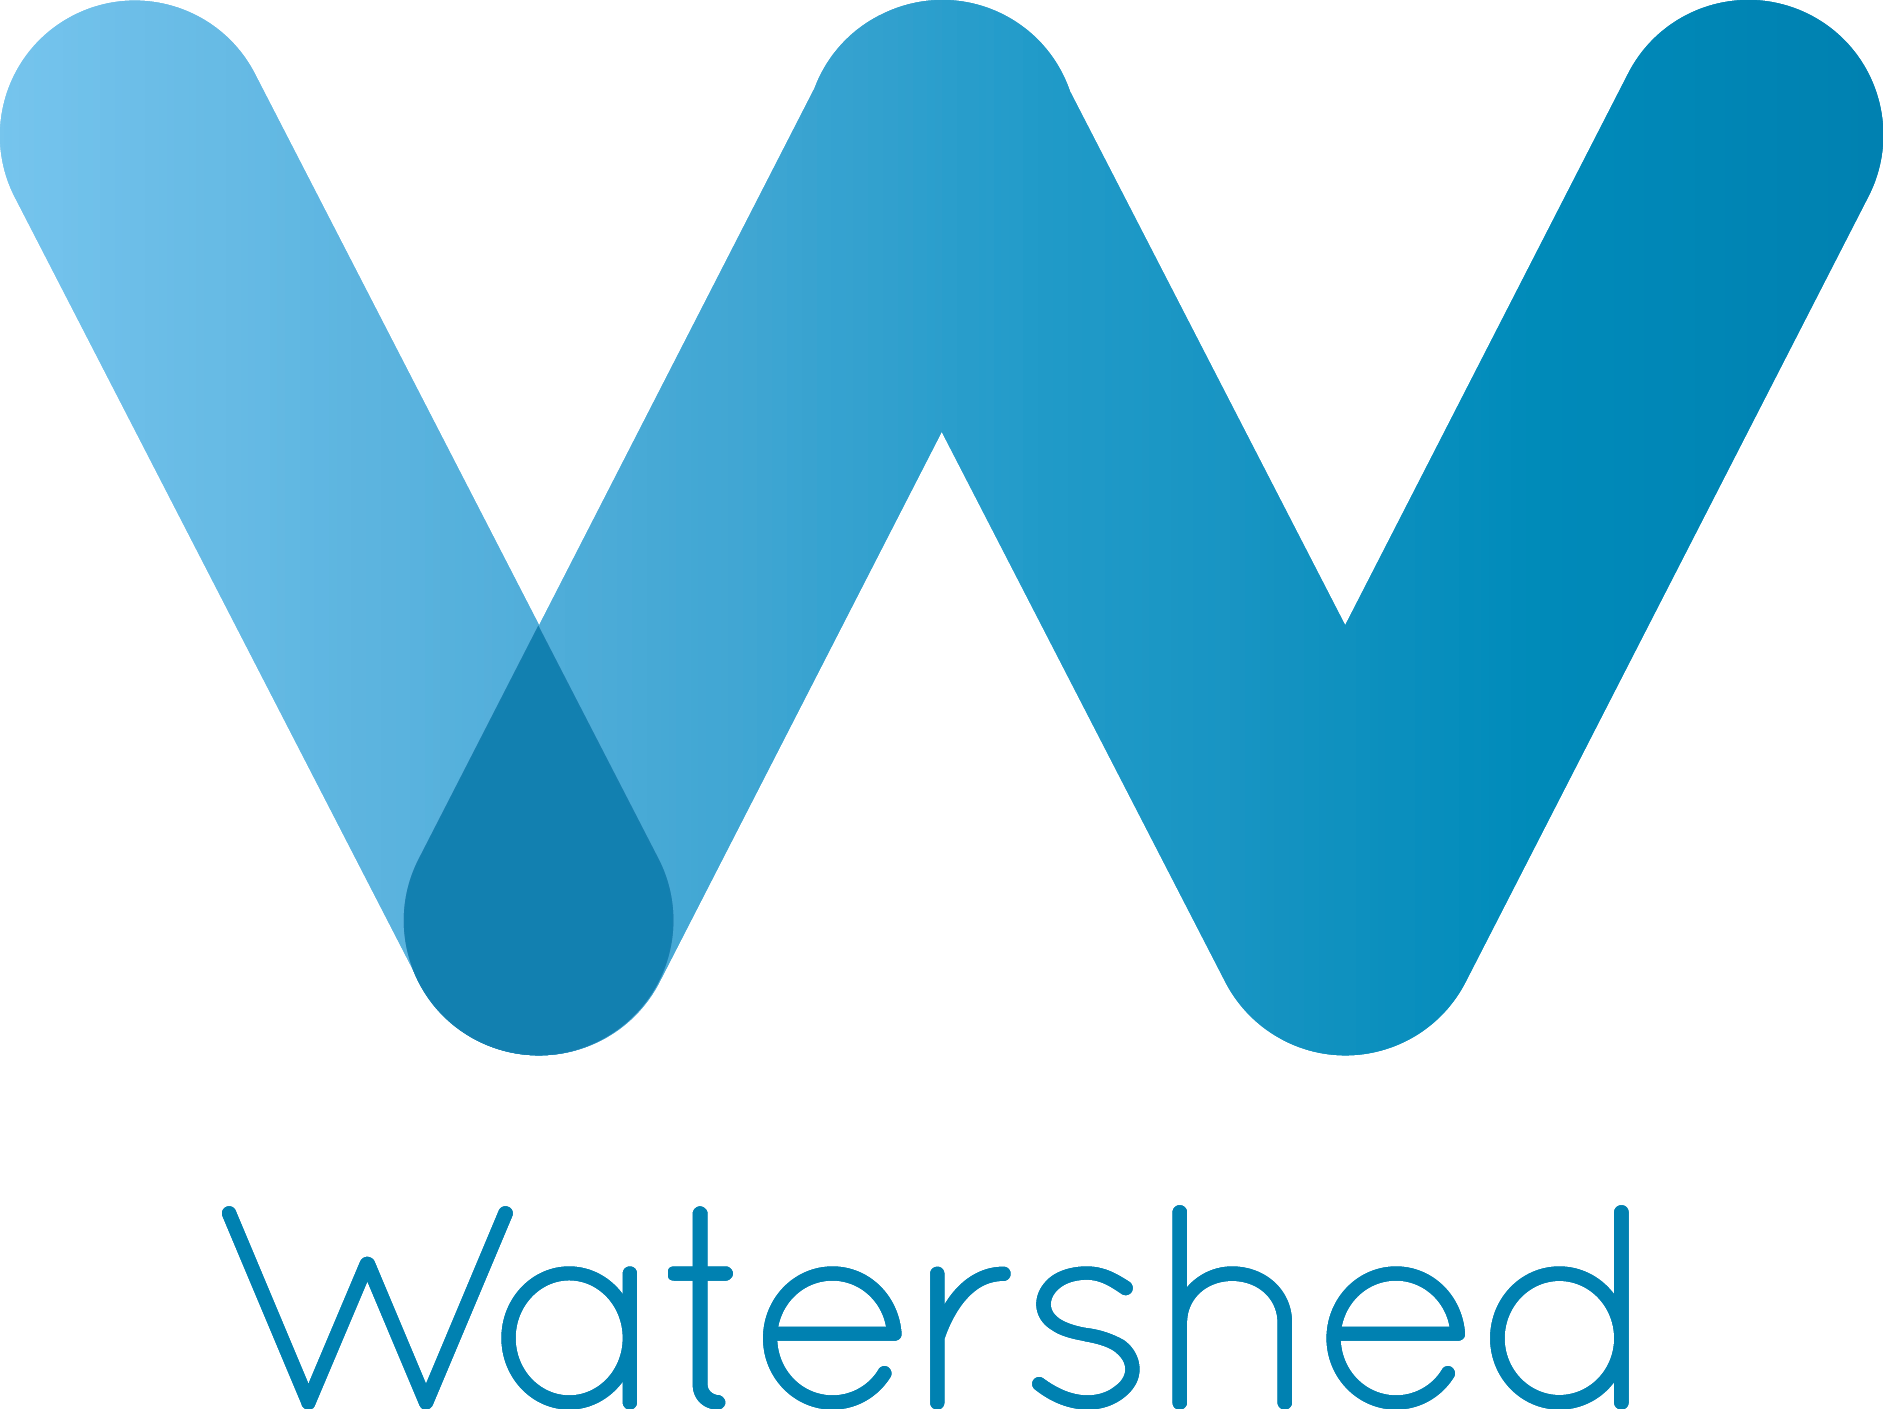 Watershed is dedicated to changing the world of e-learning by helping corporate training and learning departments get more from their learning and development initiatives.